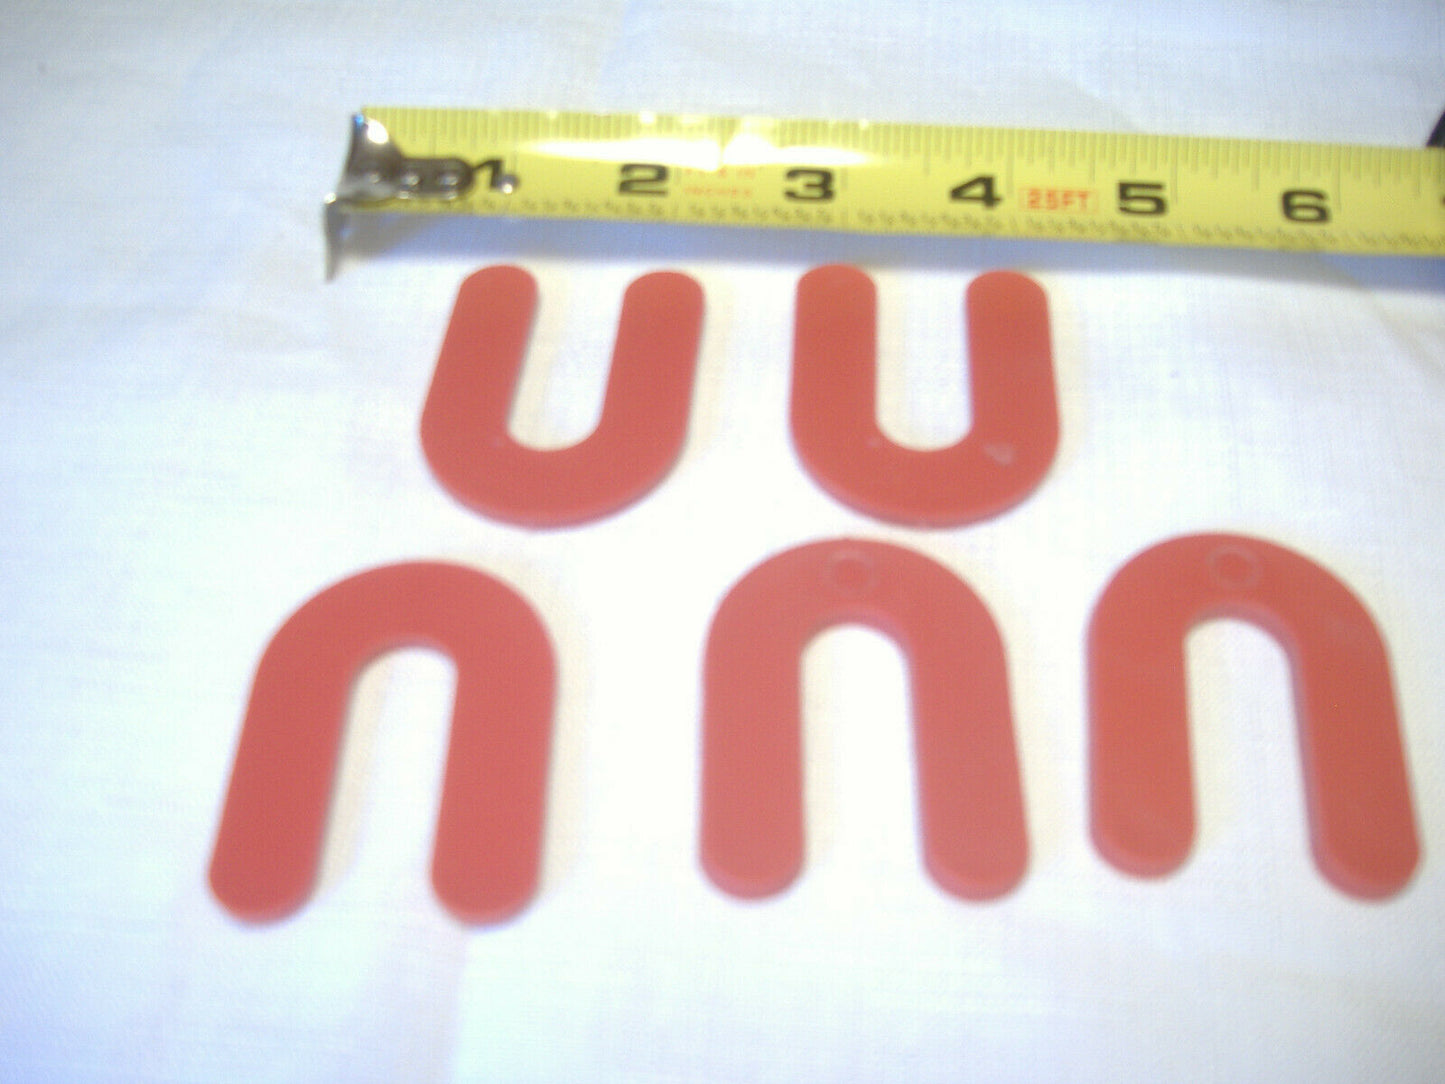 Plastic Shim Spacer 2" Long by 1-7/16" Wide Red Set of 5 Parts California Sidecar